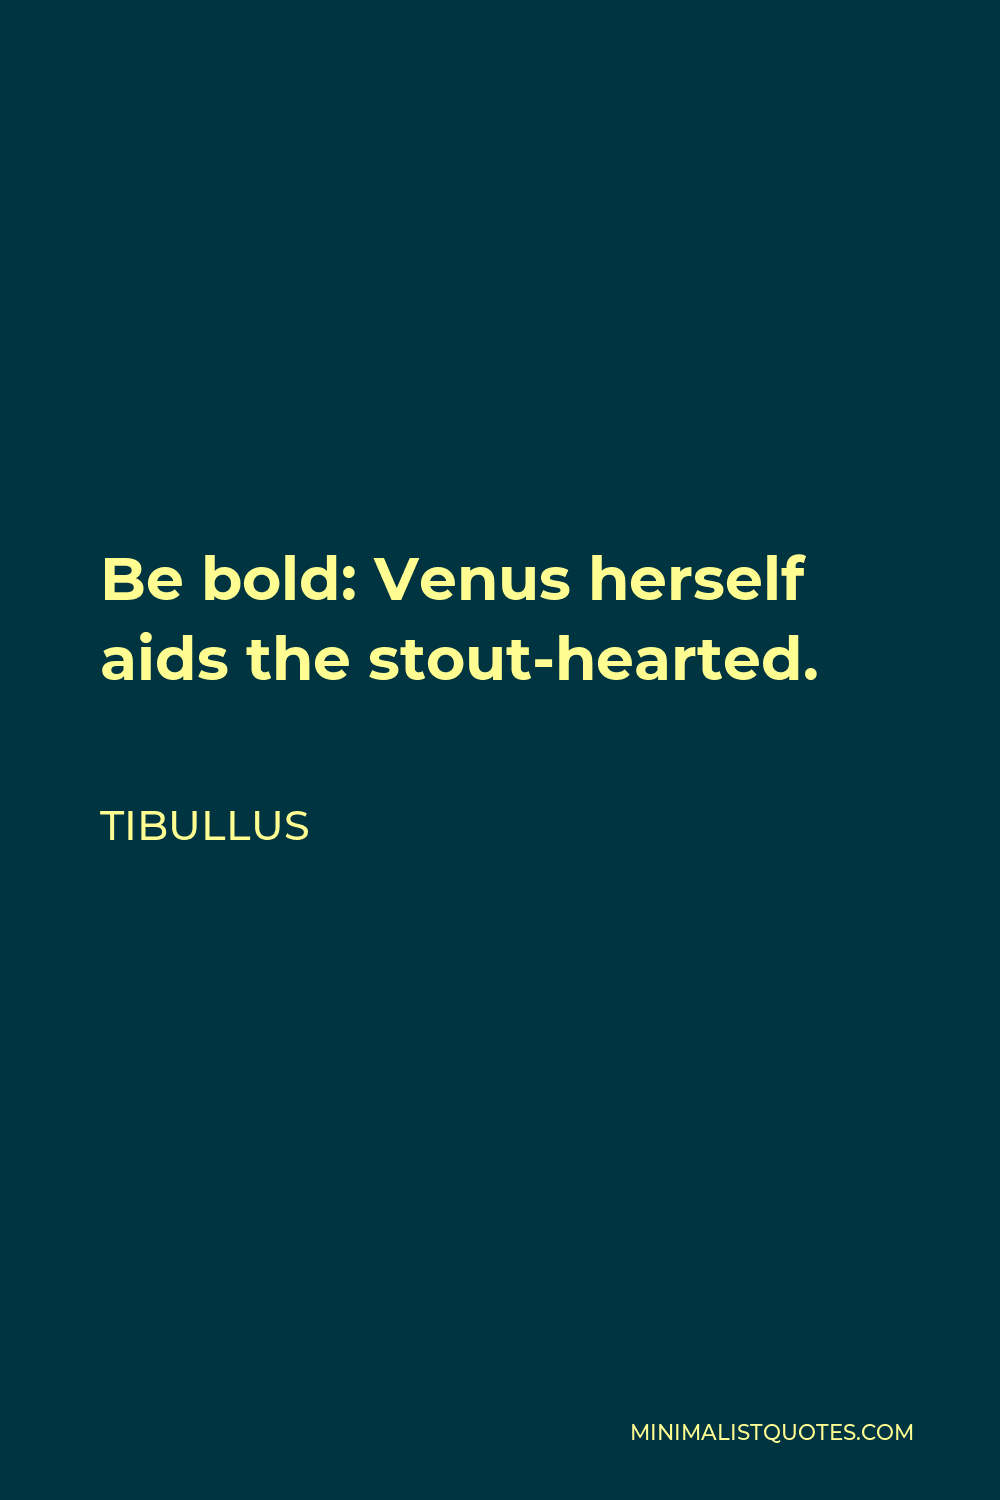 Tibullus Quote - Be bold: Venus herself aids the stout-hearted.